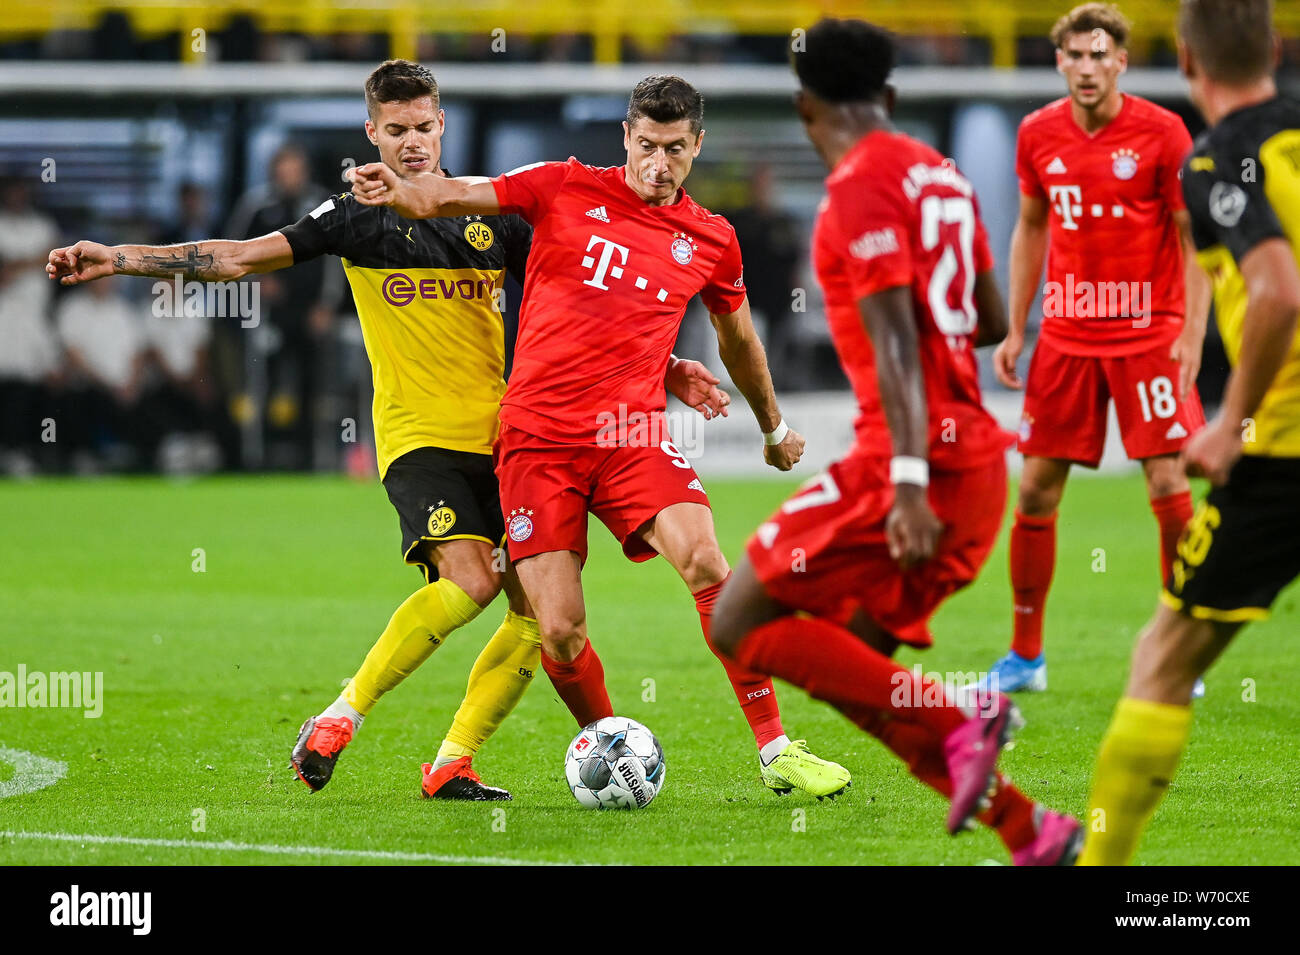 Julian Weigl from Borussia Dortmund (L) and Robert Lewandowski from Bayern Munich (R) are seen in action during the Germany Supercup Final 2019 match between Borussia Dortmund and Bayern Munich.(Final score: Borussia Dortmund 2:0 Bayern Munich) Stock Photo